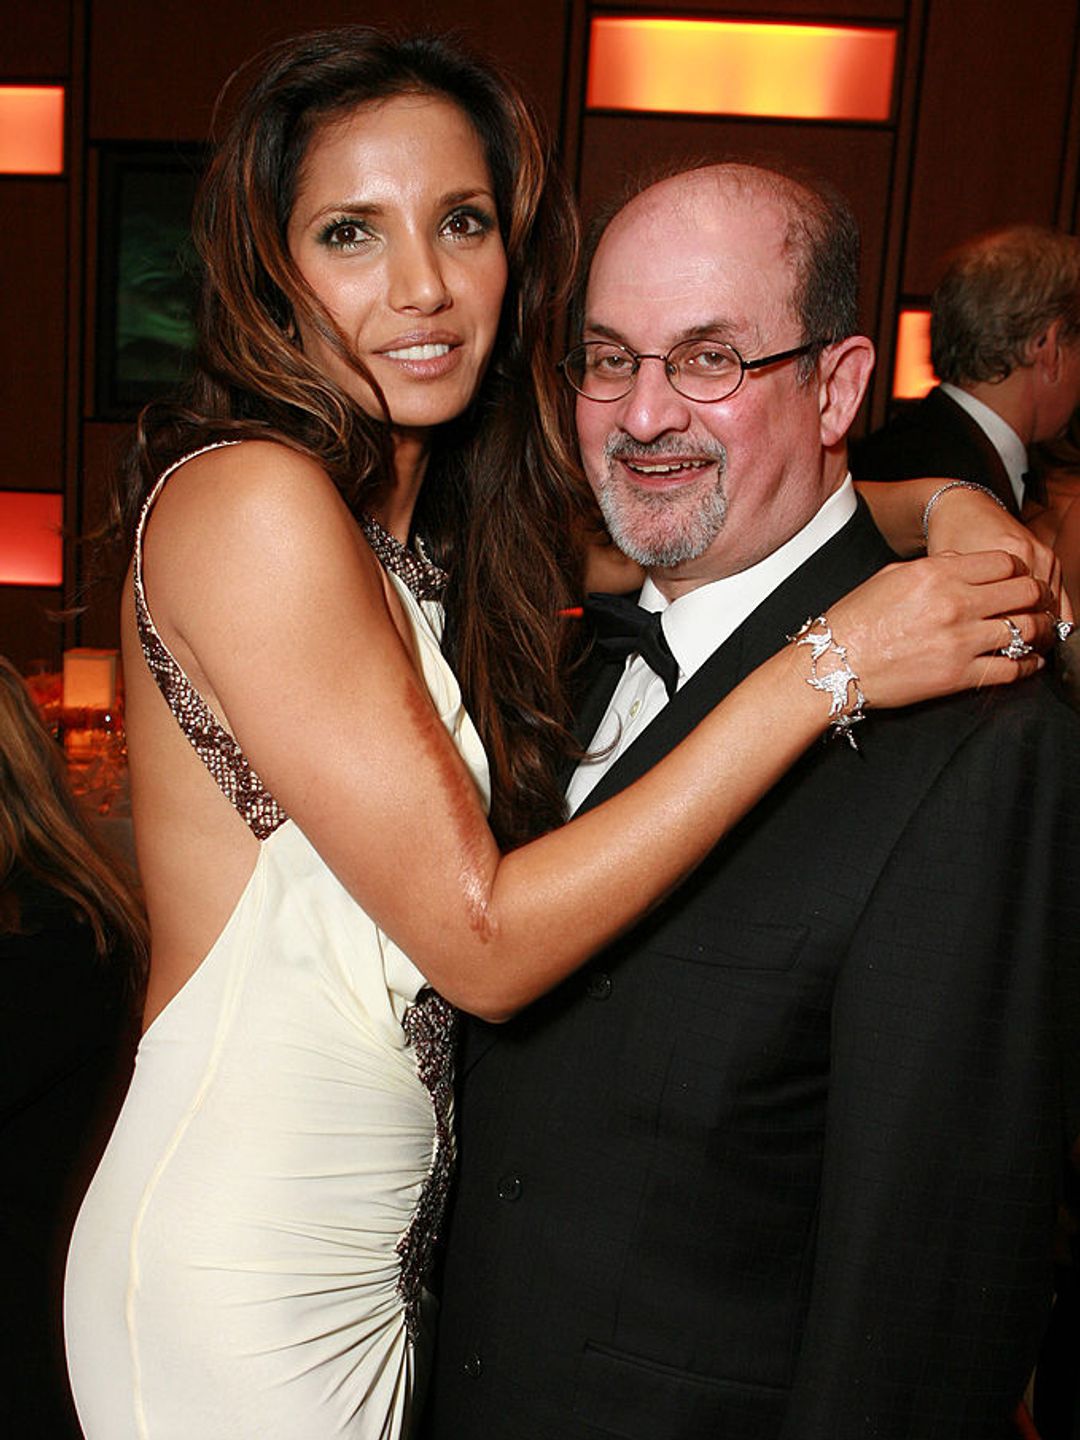 Padma Lakshmi and Salman Rushdie at a party. She is wearing a white backless dress and he is dressed in a classic tuxedo. 